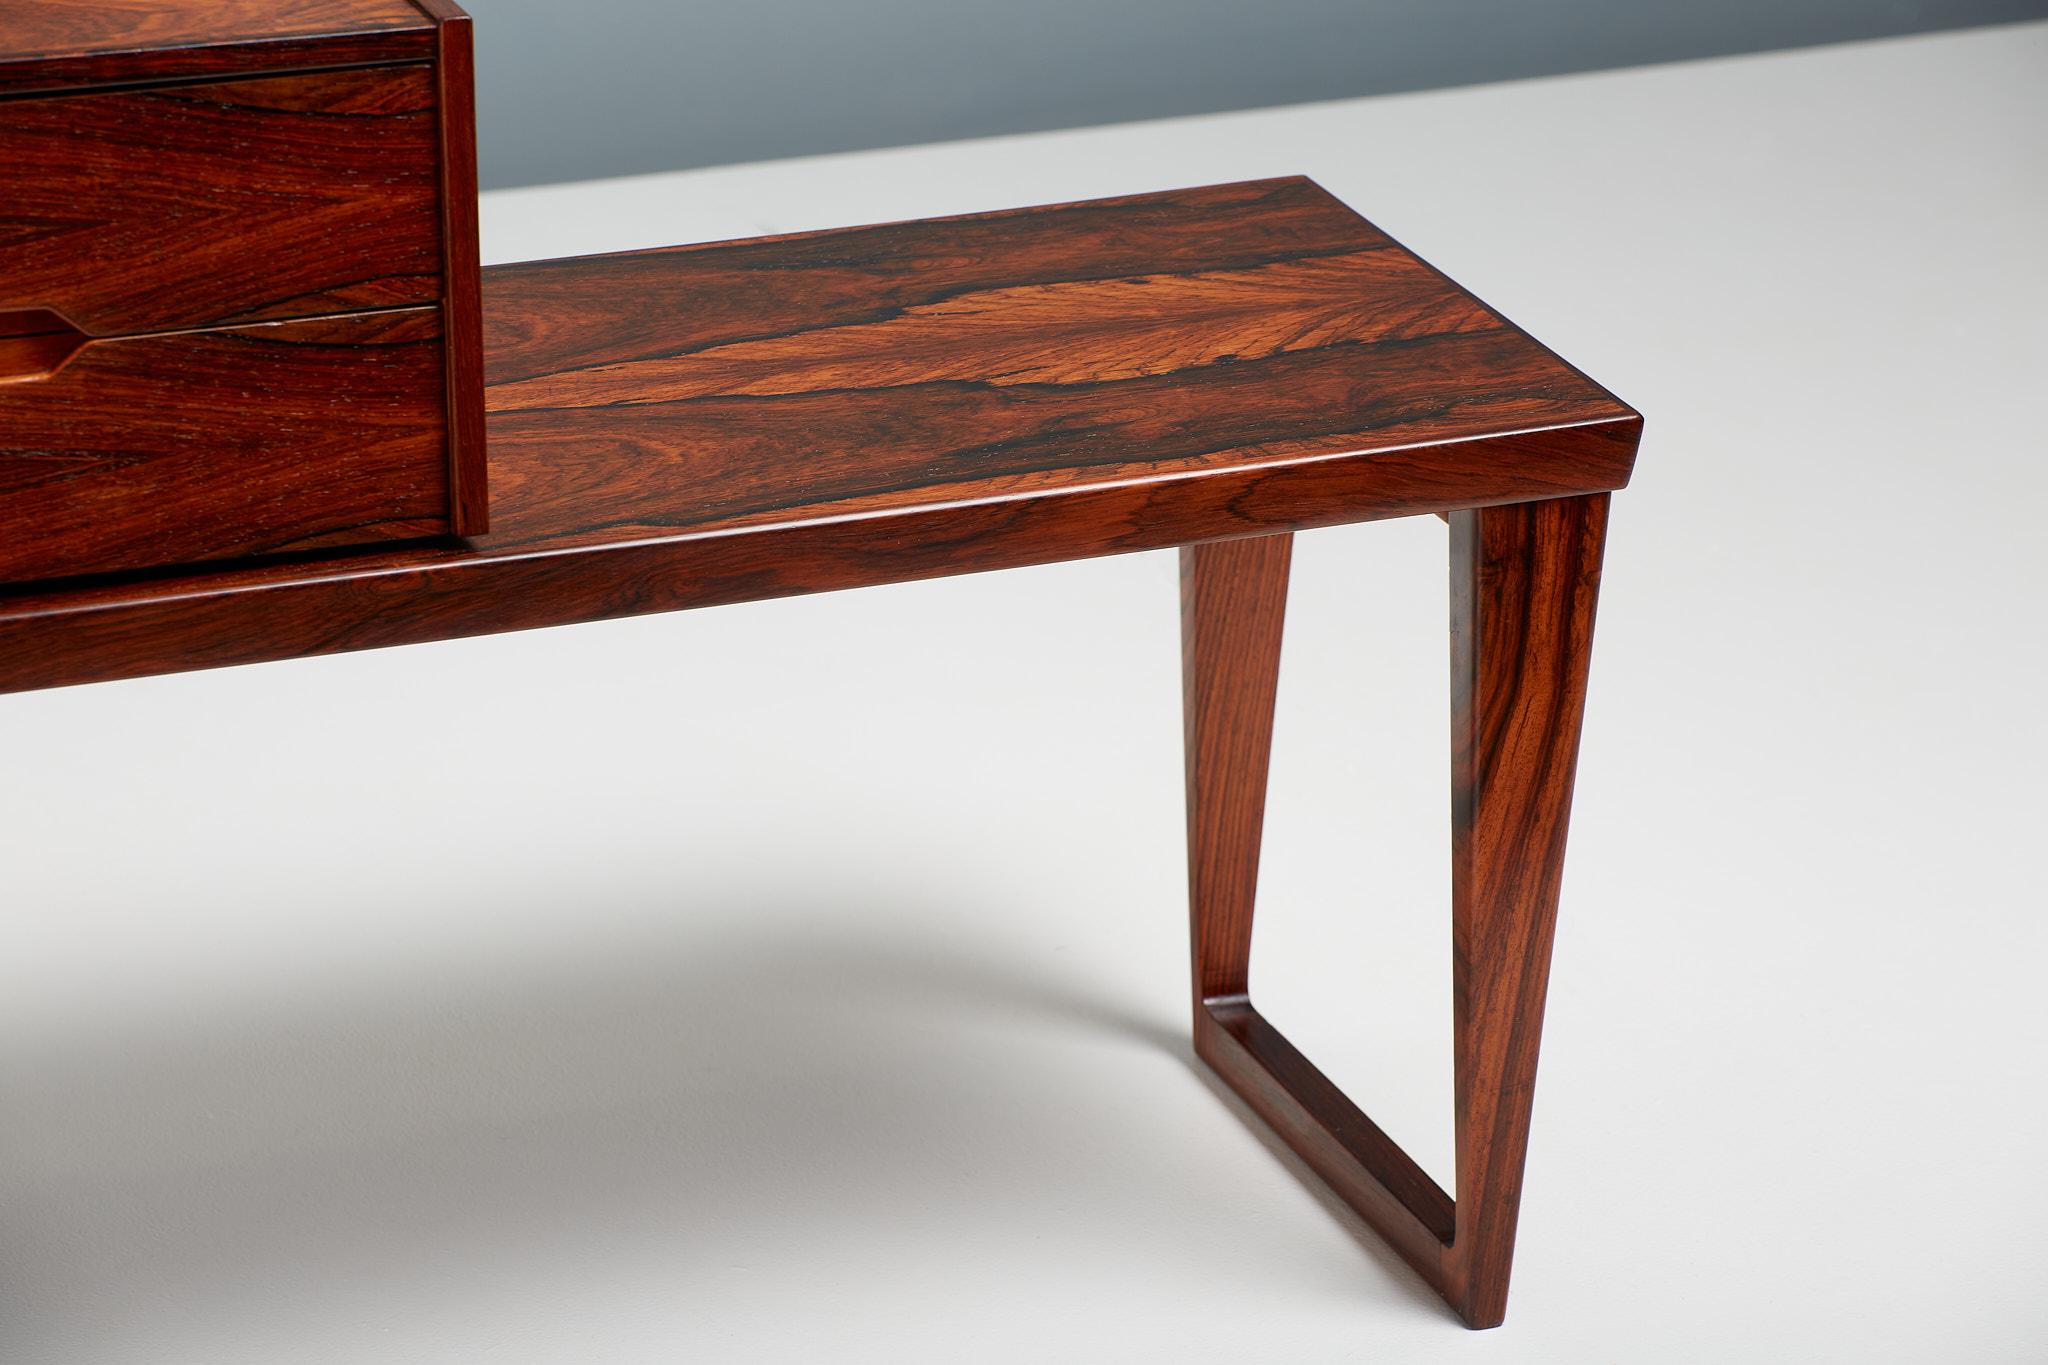 Stunning, exotic grained rosewood bench with matching, loose standing two-drawer unit which can be positioned anywhere along the bench surface. This piece was designed by Danish design icon Kai Kristiansen and produced by Aksel Kjersgaard in Odder,